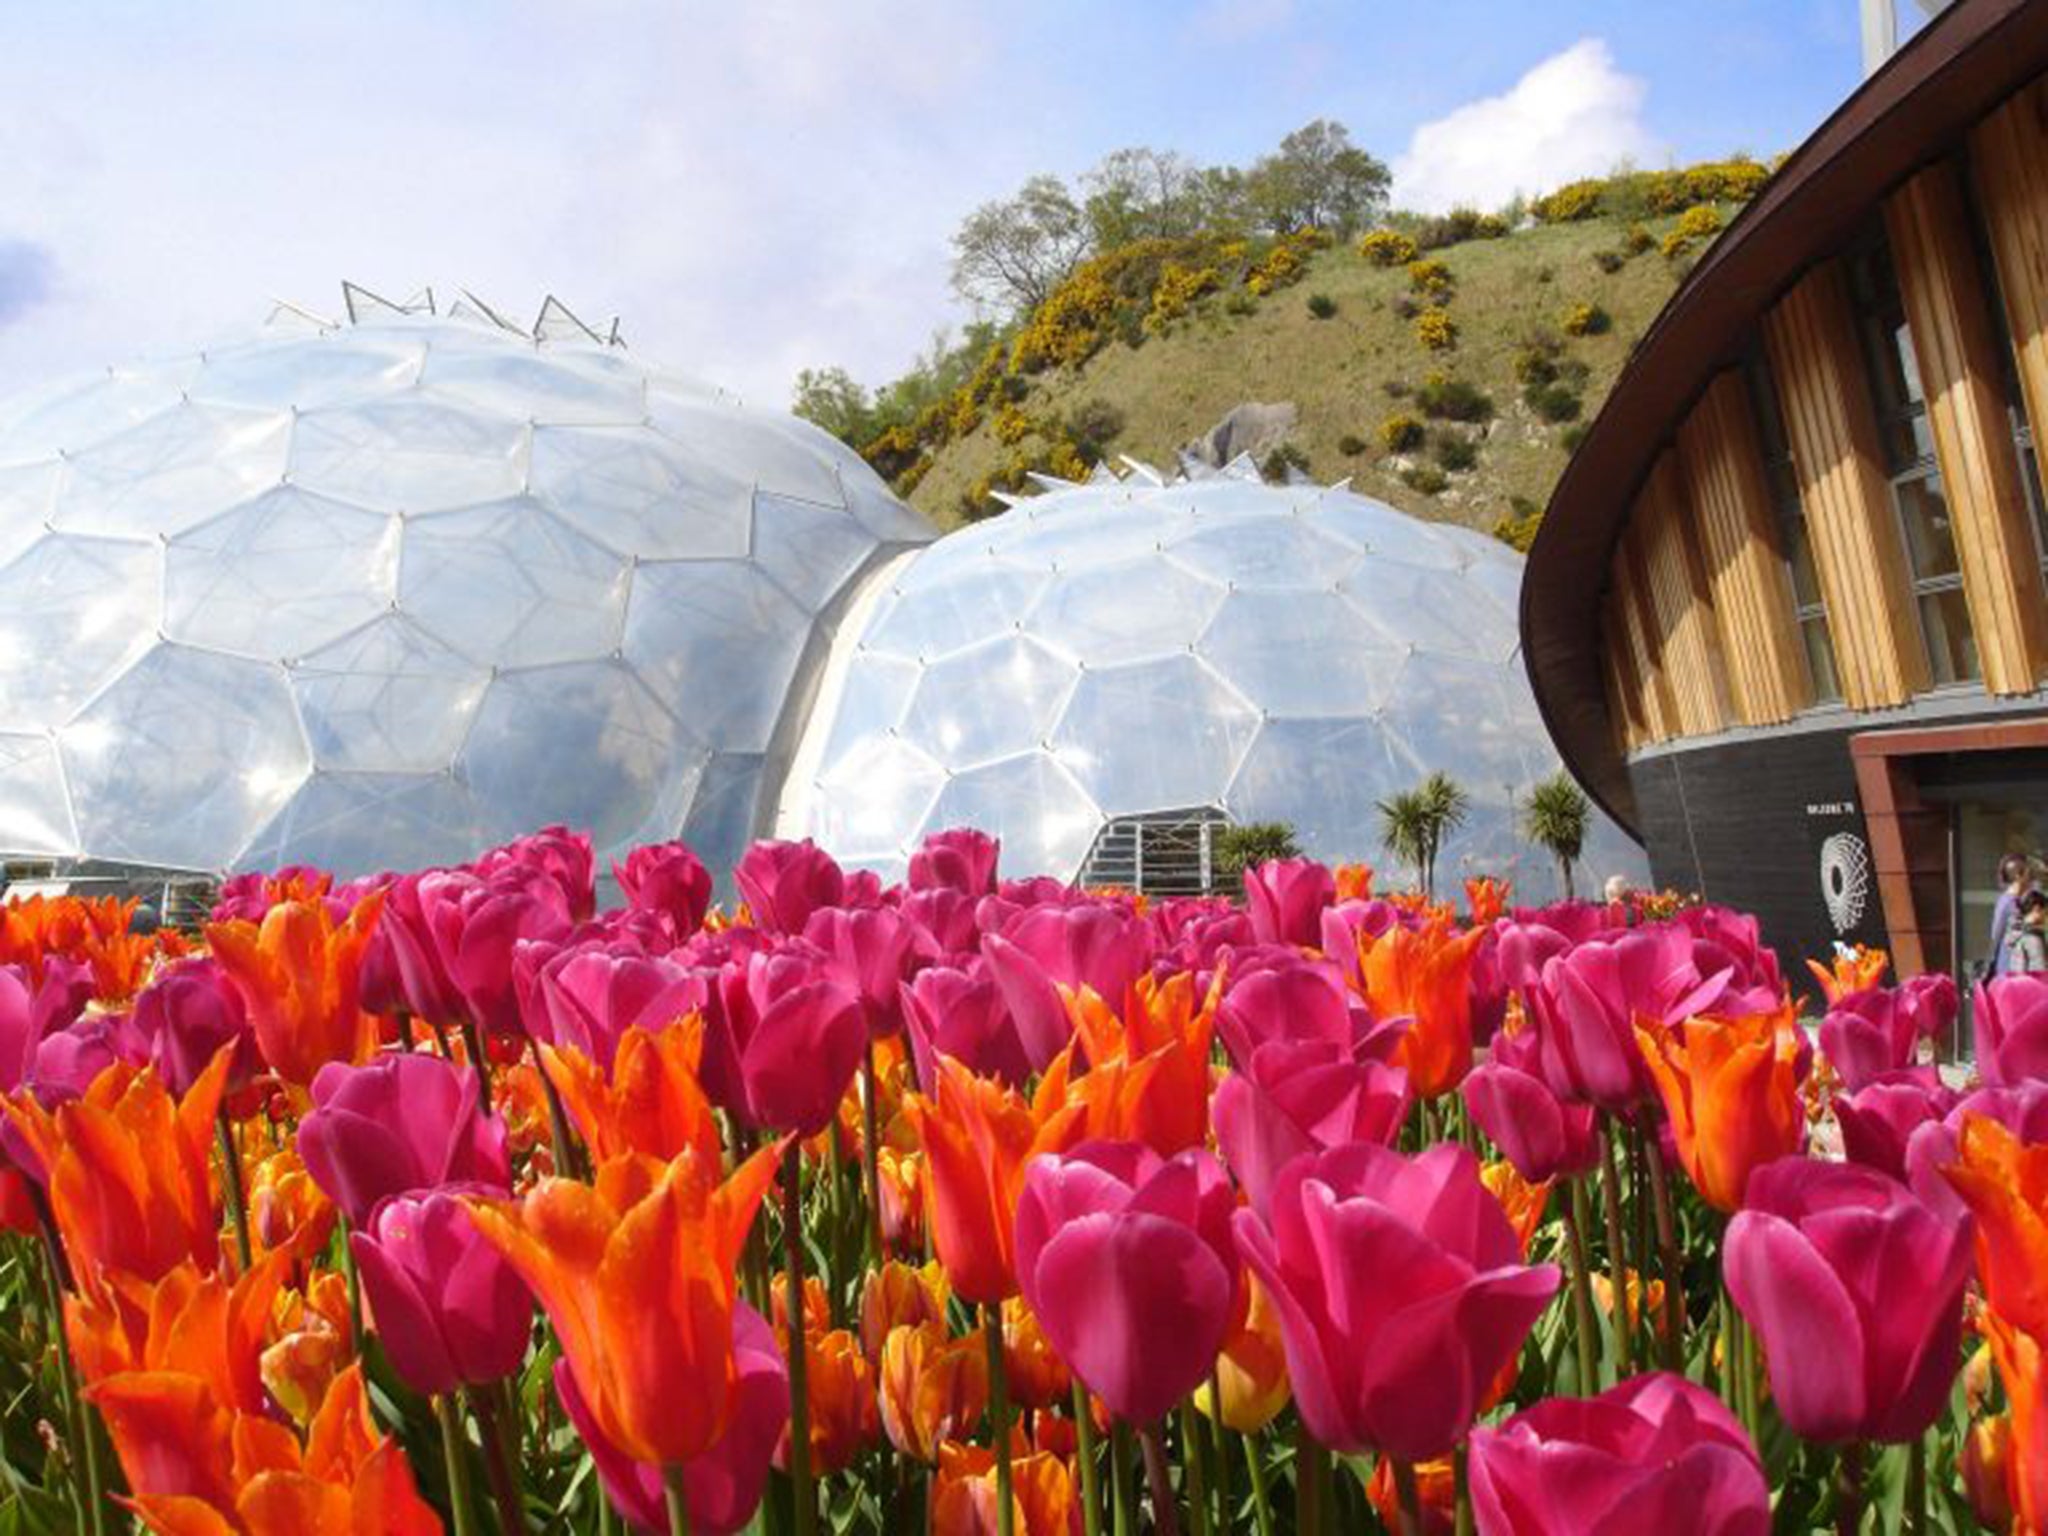 Eden Project staff say keeping pests under control has been a problem inside the biomes where the plants thrive